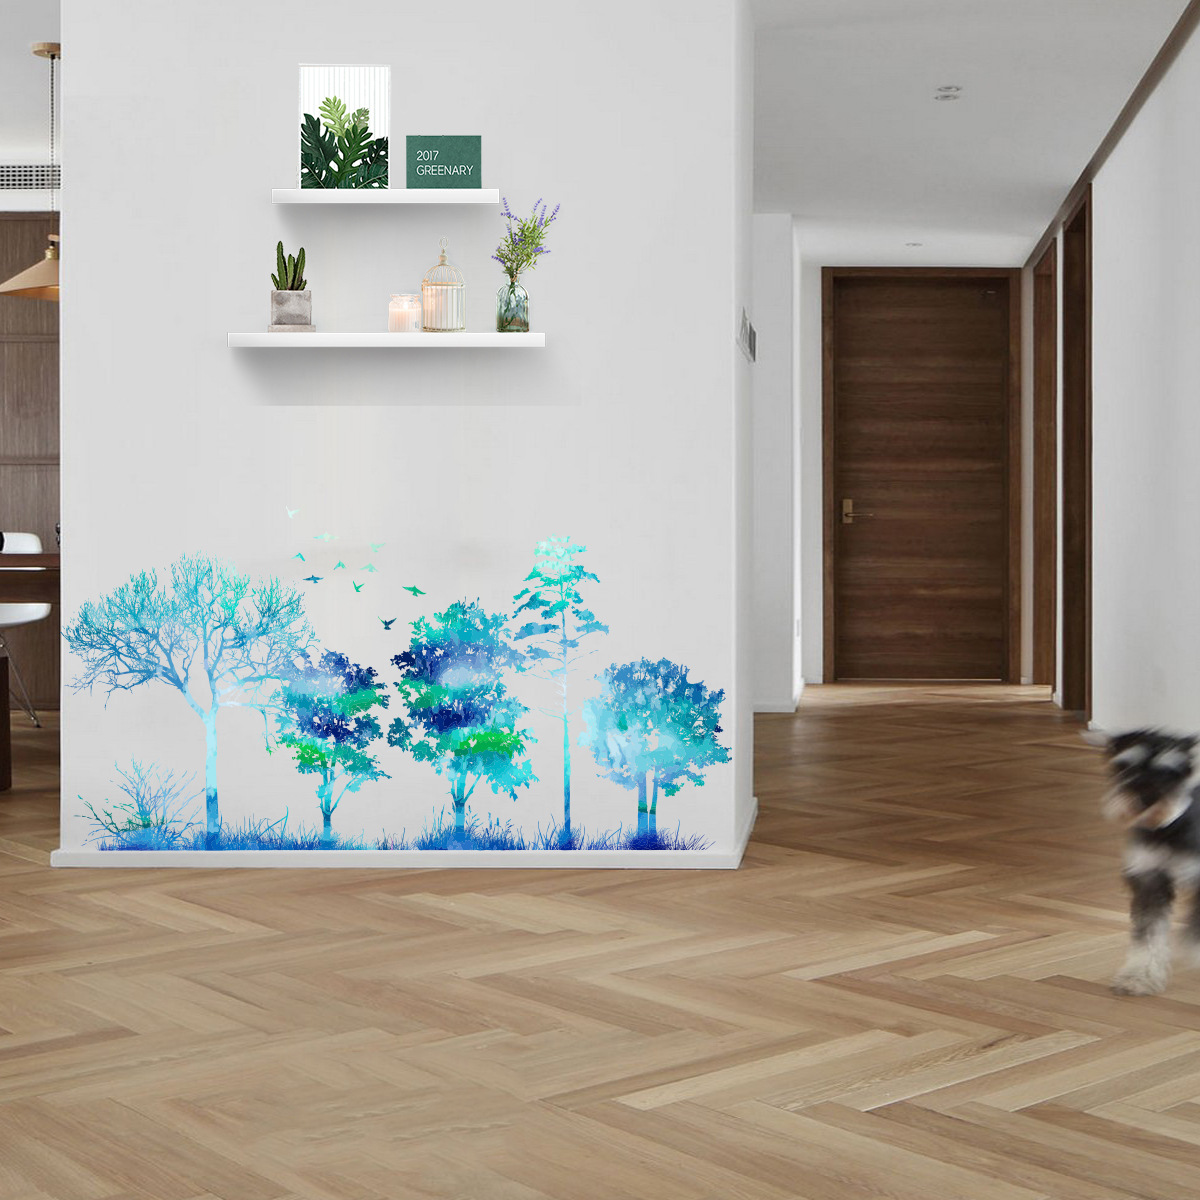 ZW106-Creative-Wall-Stickers-Folding-Version-Of-The-New-Hand-Painted-Blue-Gradient-Forest-Plants-Liv-1811493-4